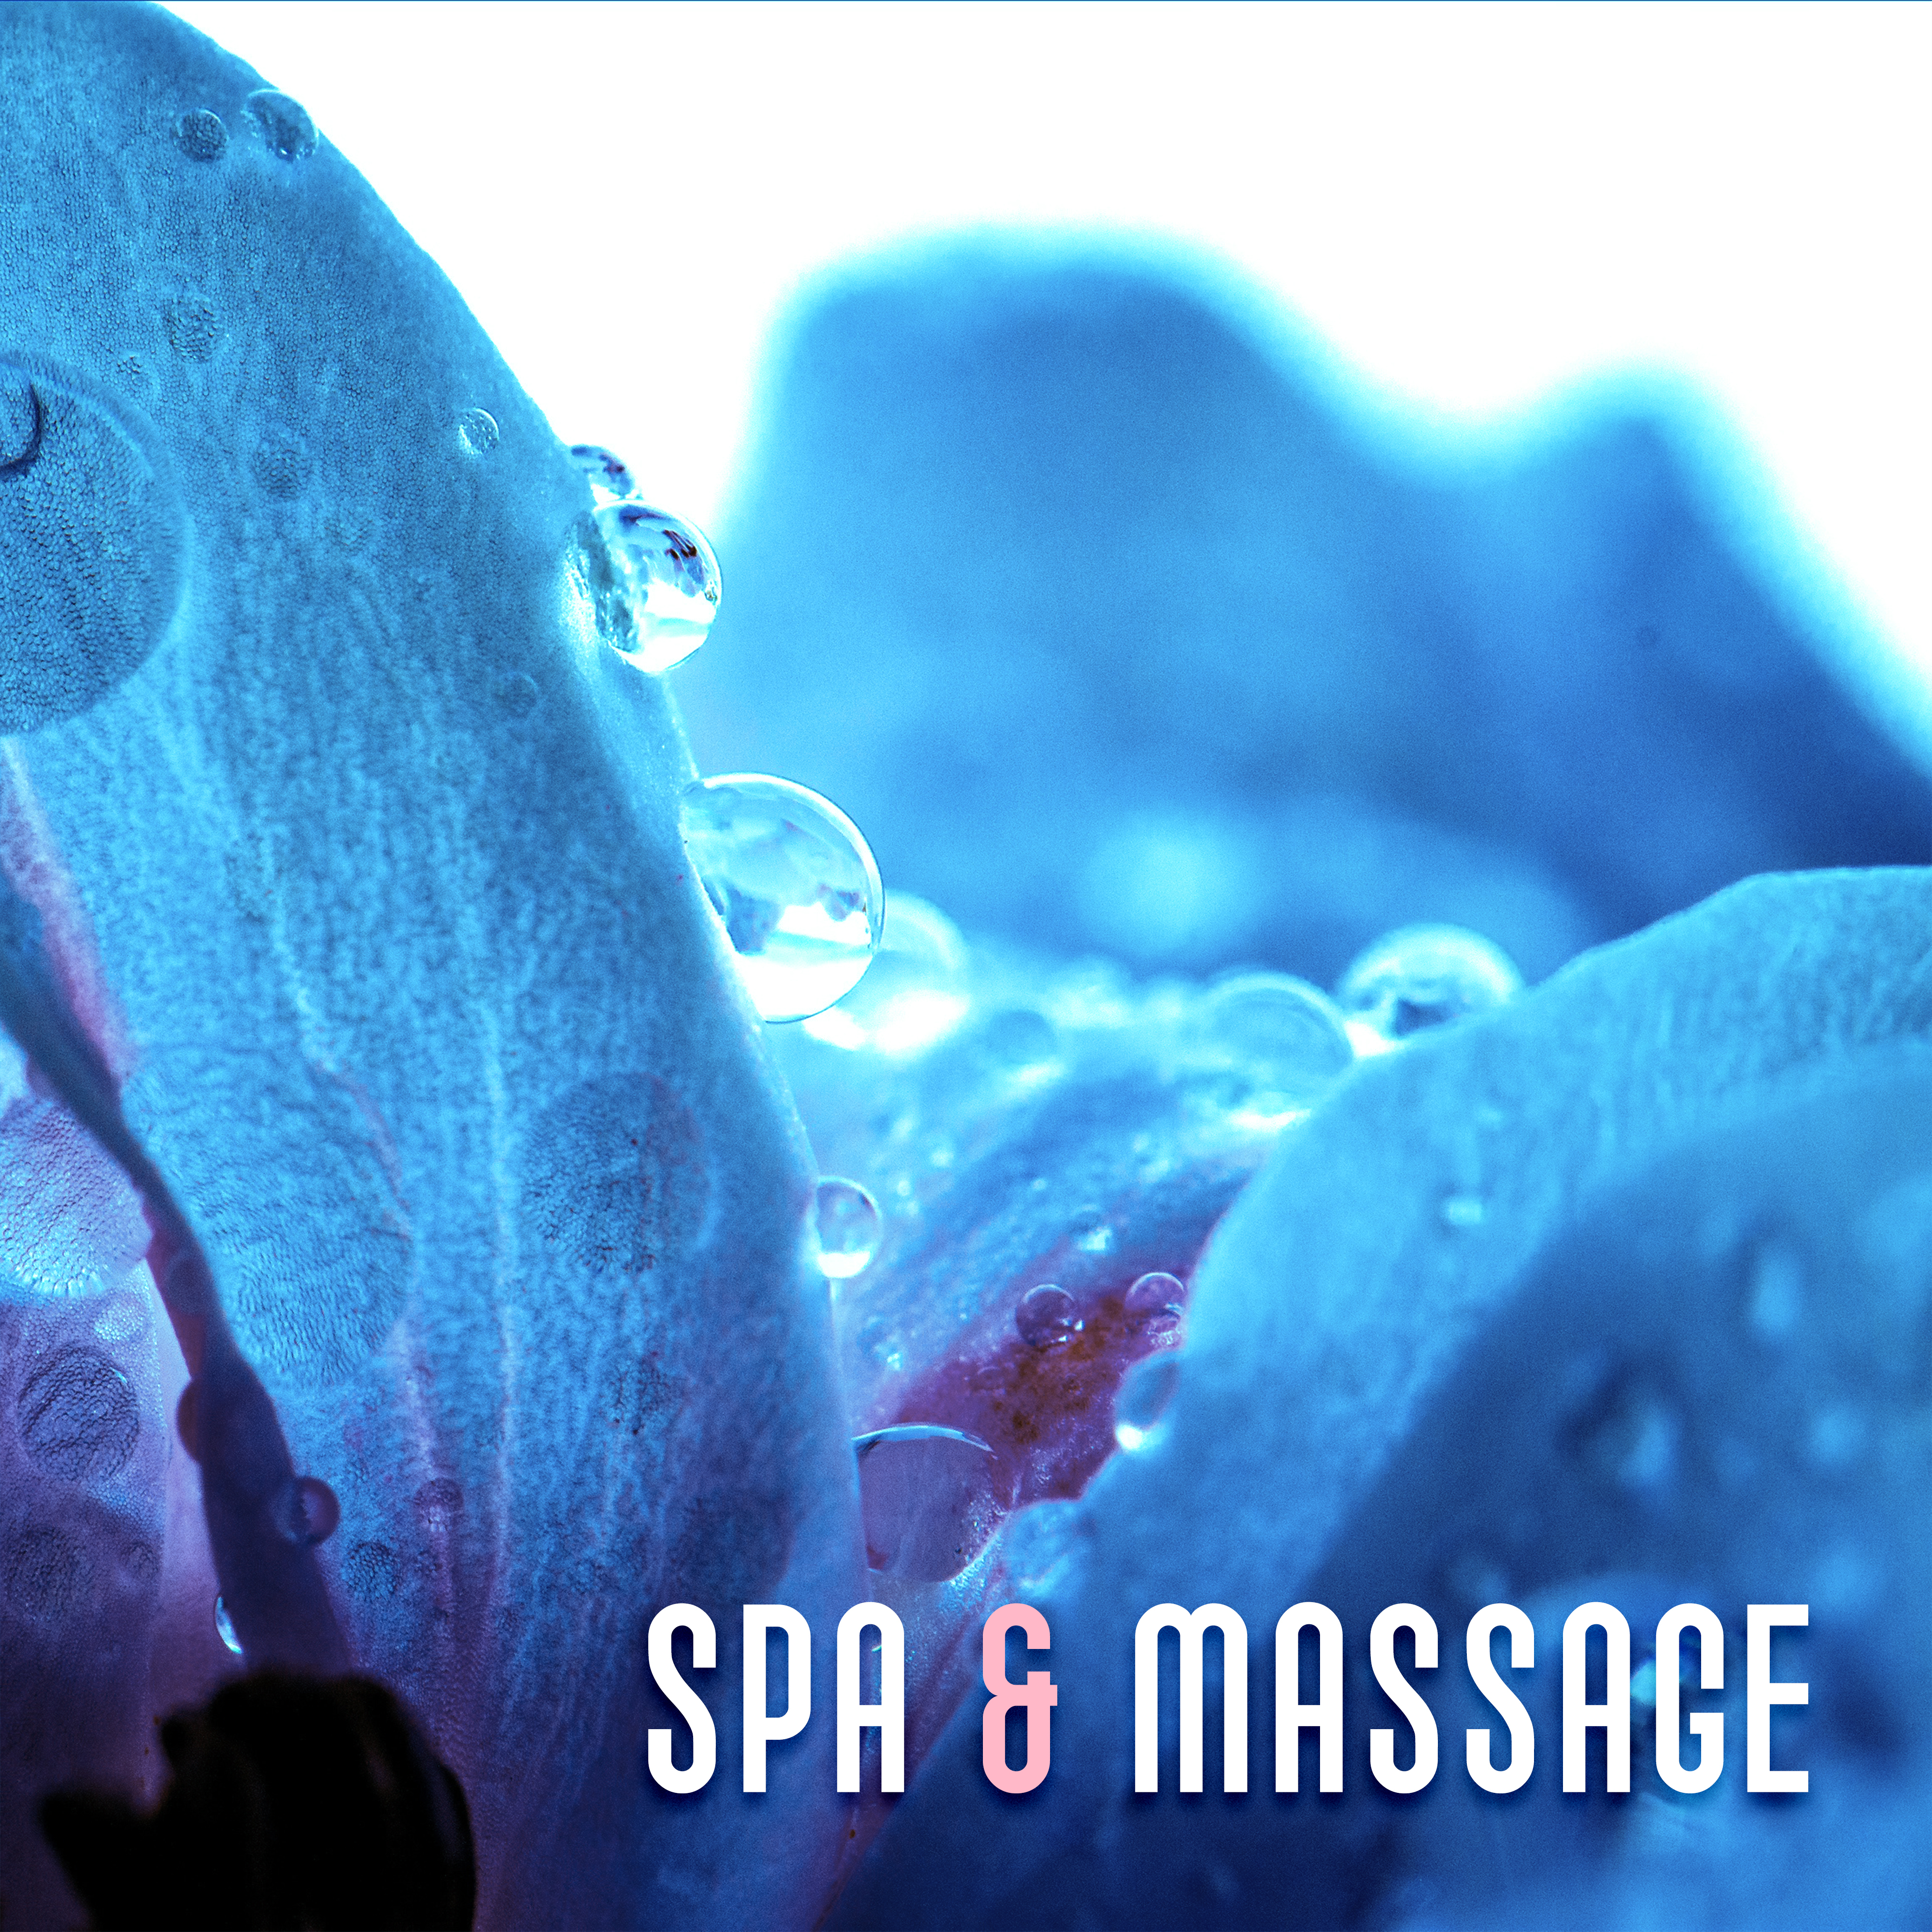 Spa  Massage  Music for Relaxation, Stress Free, Meditation Music, Wellness, Spa Dreams, Nature Sounds, Relief